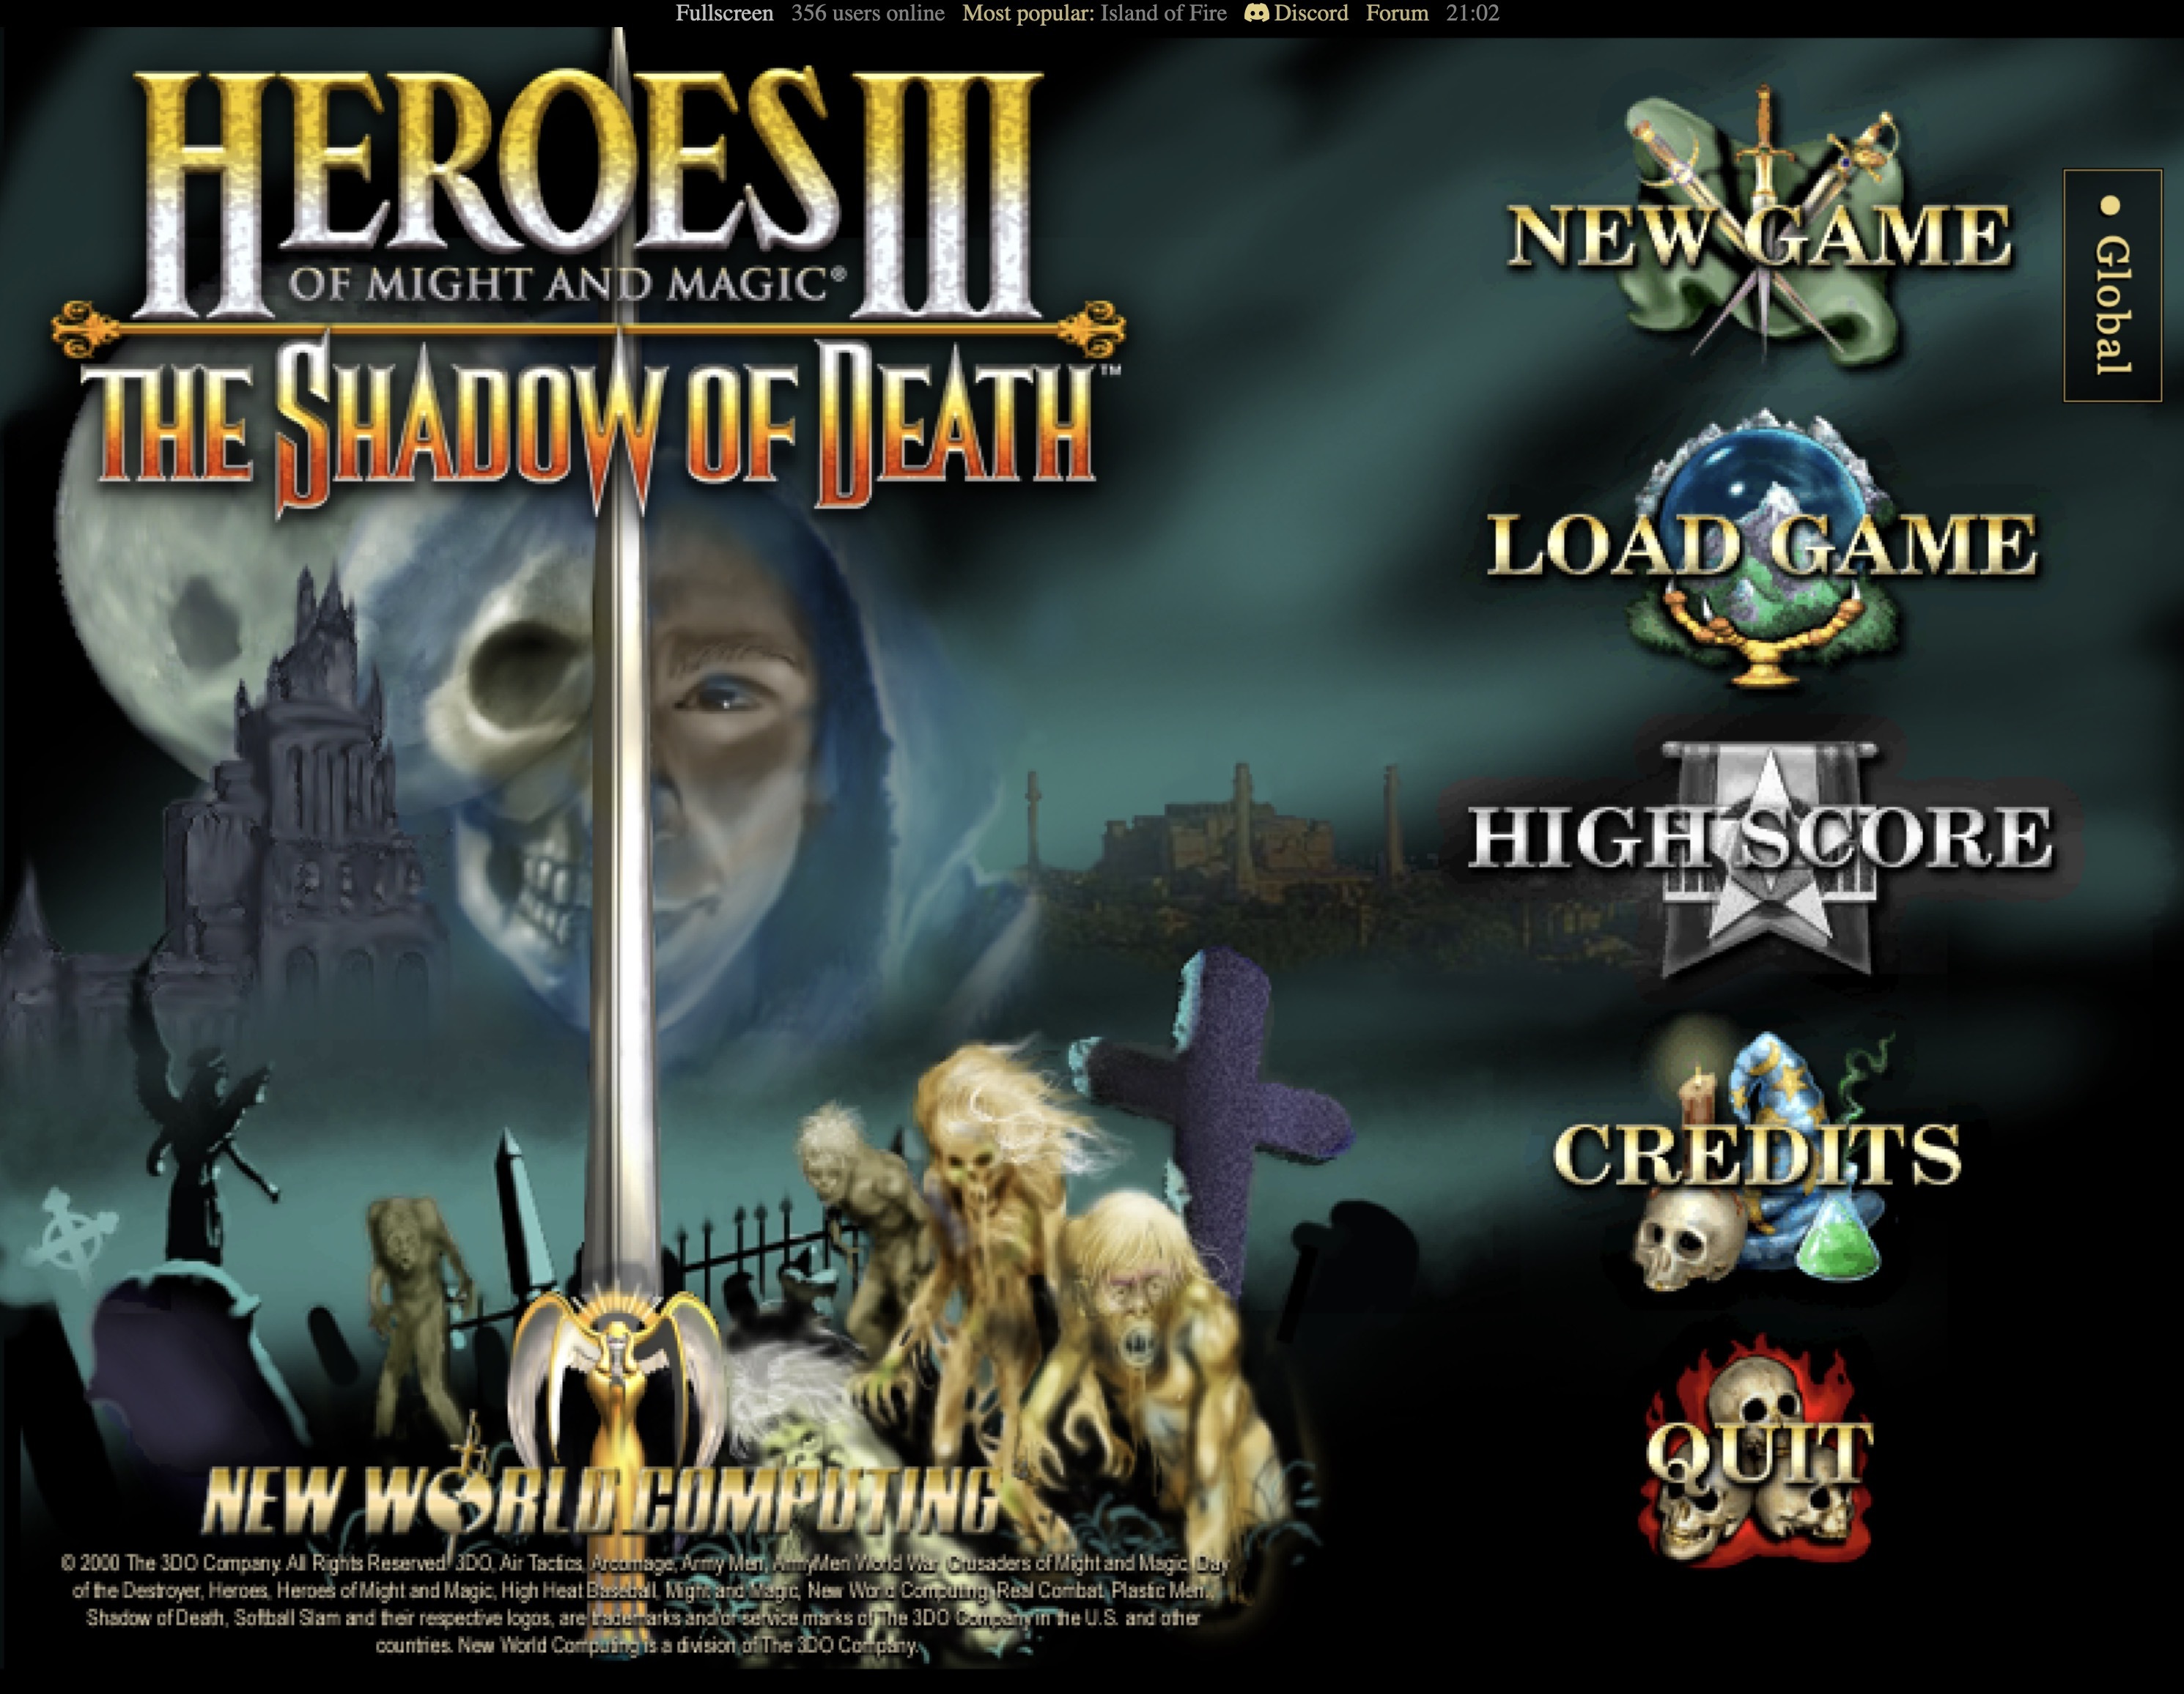 Might and main. Heroes of might and Magic 3 дыхание смерти. Heroes of might and Magic 3 дыхание смерти обложка. Герои меча и магии 3 дыхание смерти диск. Heroes of might and Magic 3 the Shadow of Death меню.